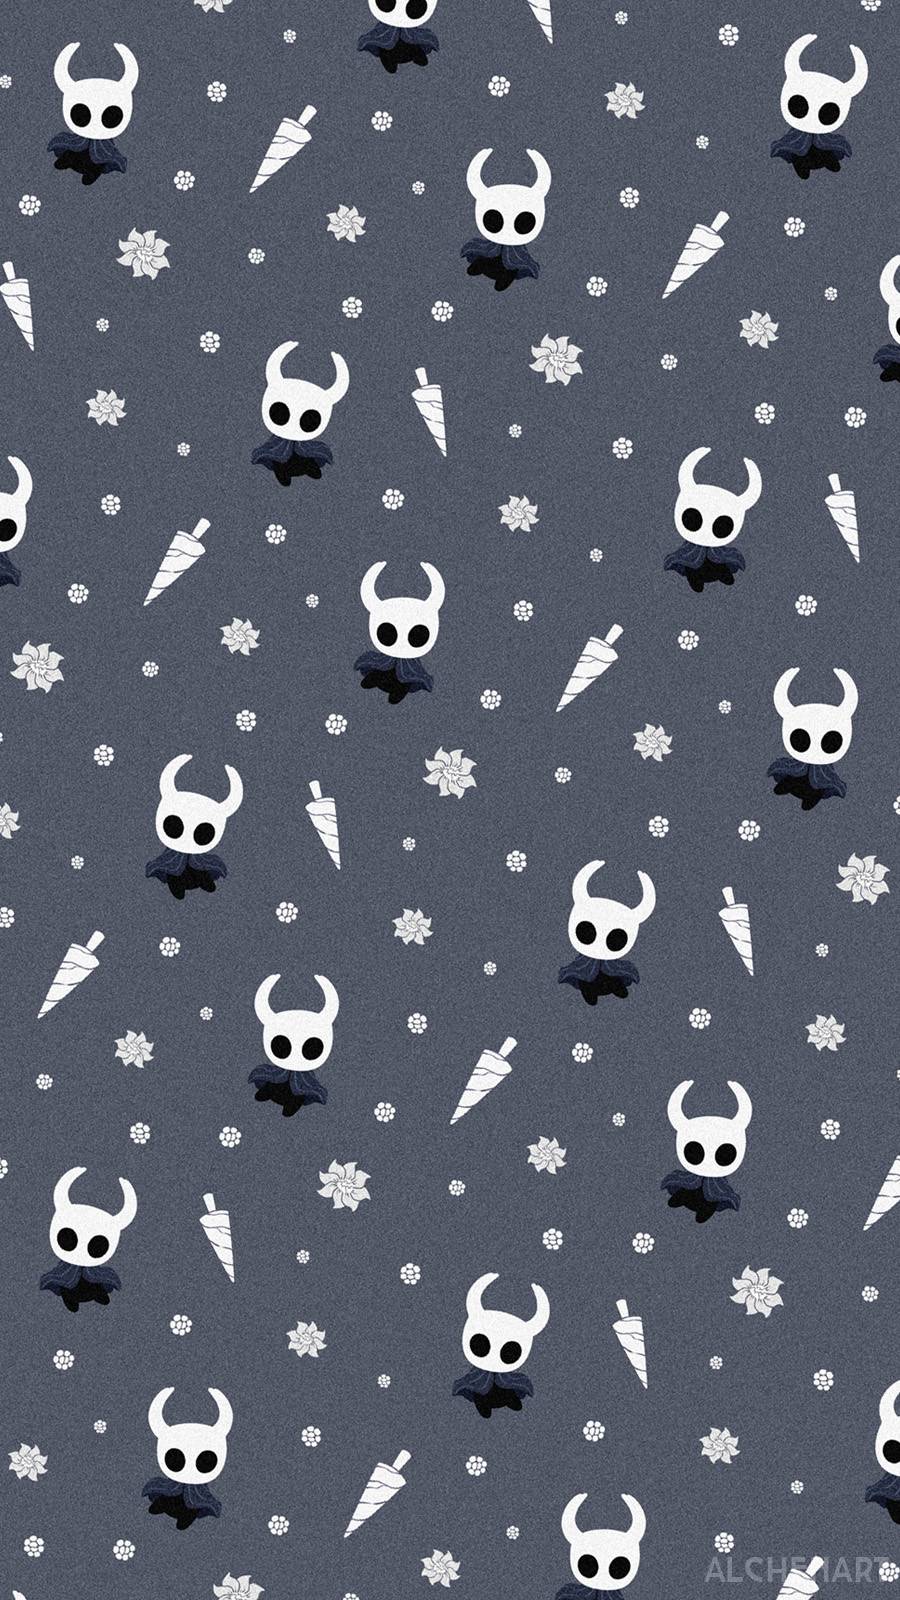 A pattern featuring The Knight from Hollow knight 